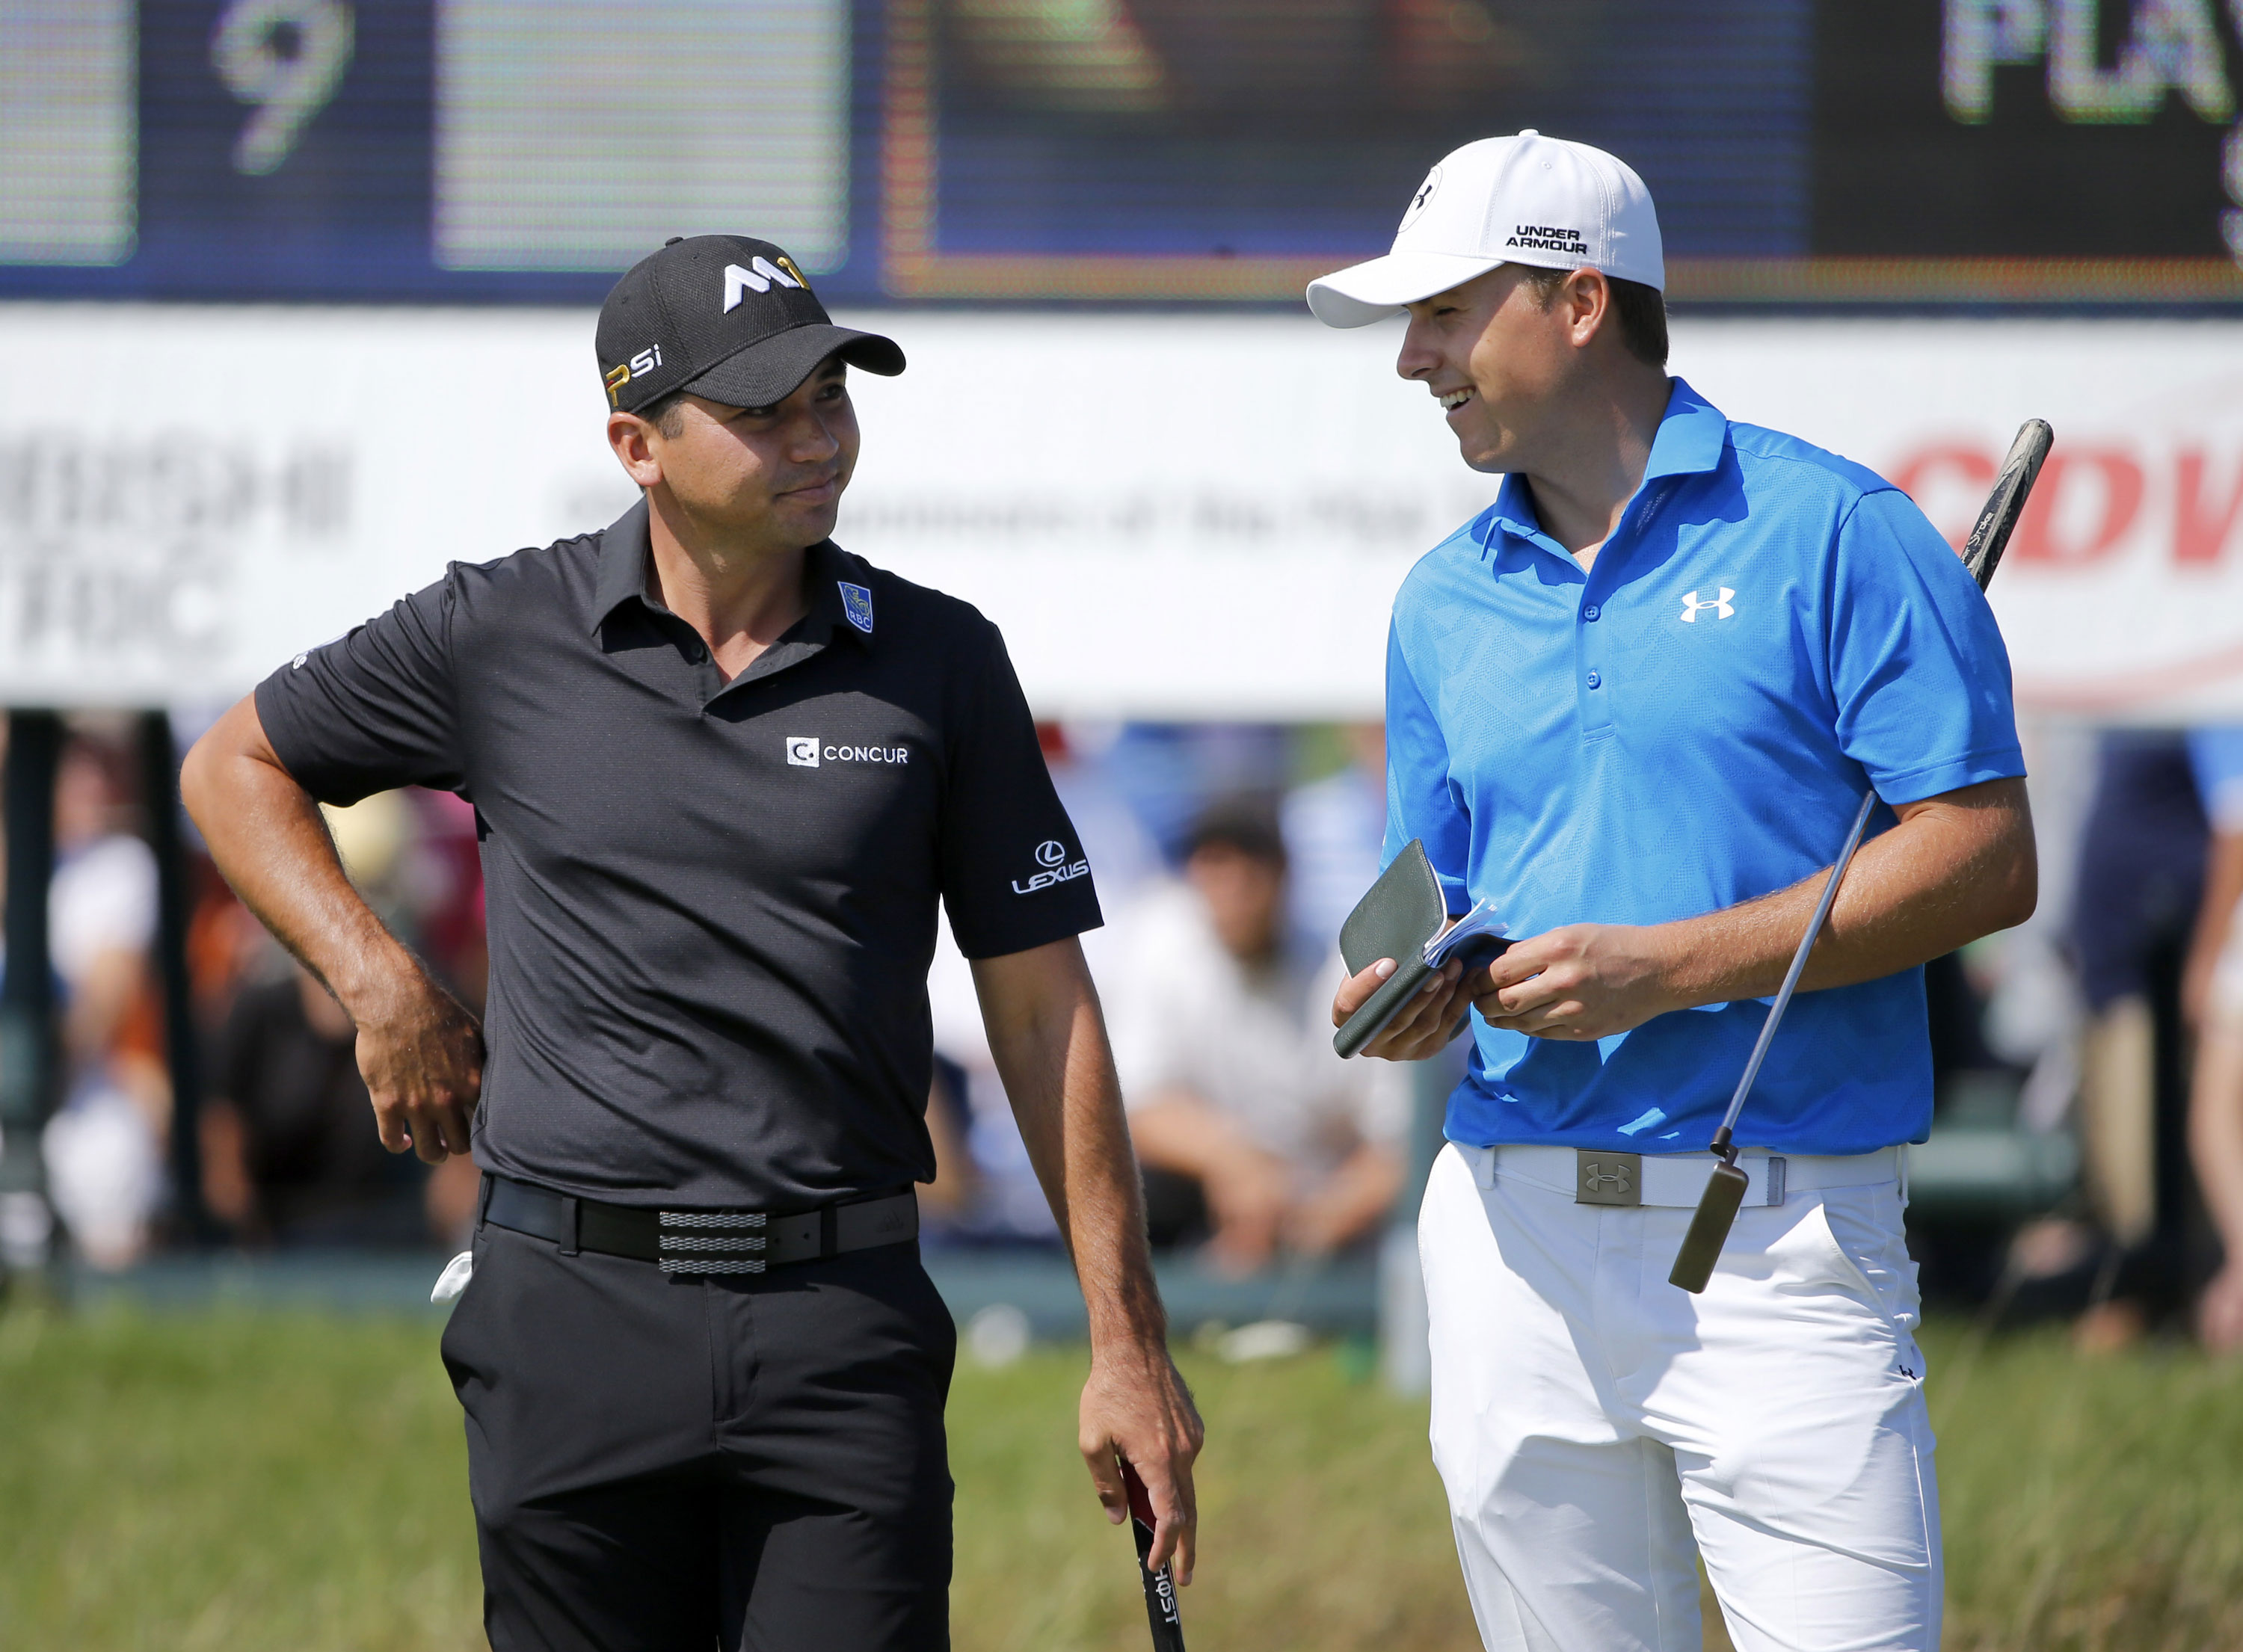 Chaos At The Top .... Is Jason Day Ready To Unseat Jordan Spieth As Golf's Top Dog?